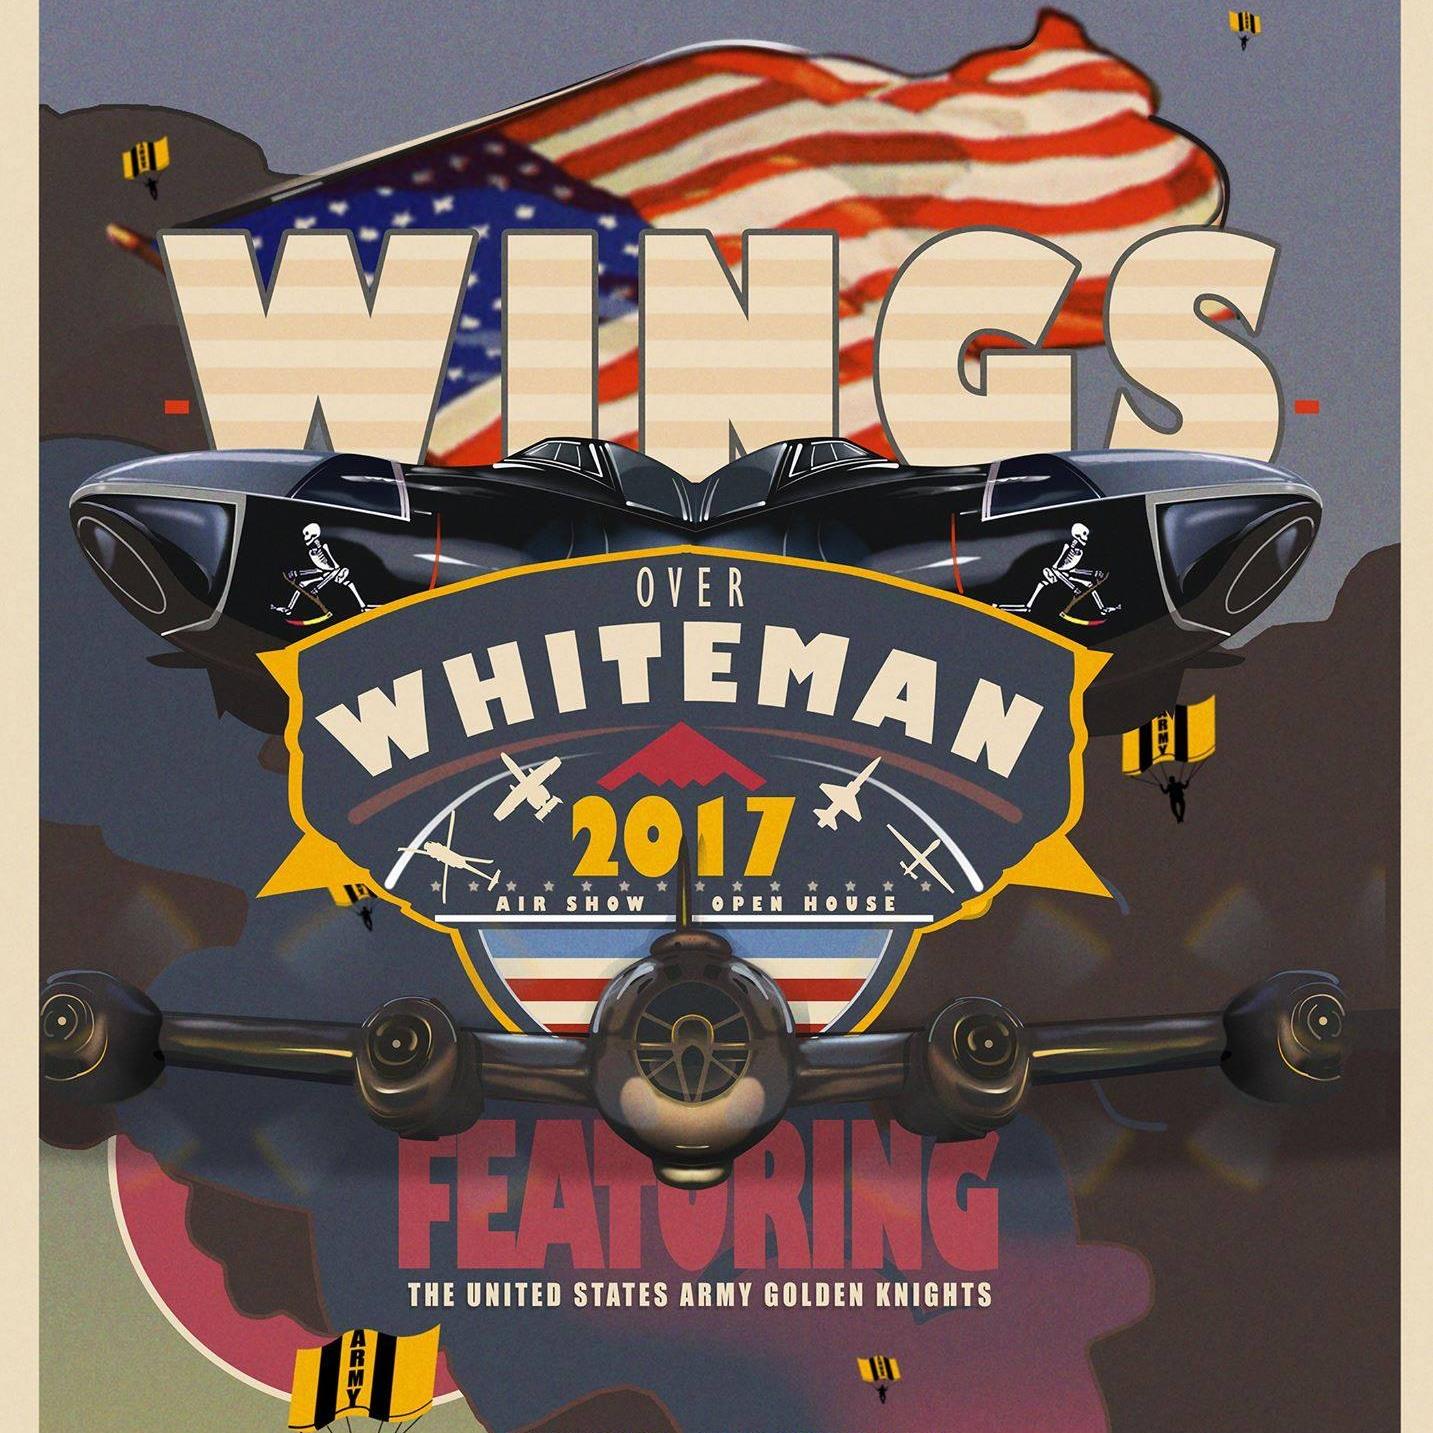 Wings Over Whiteman returns with seven decades of aircraft